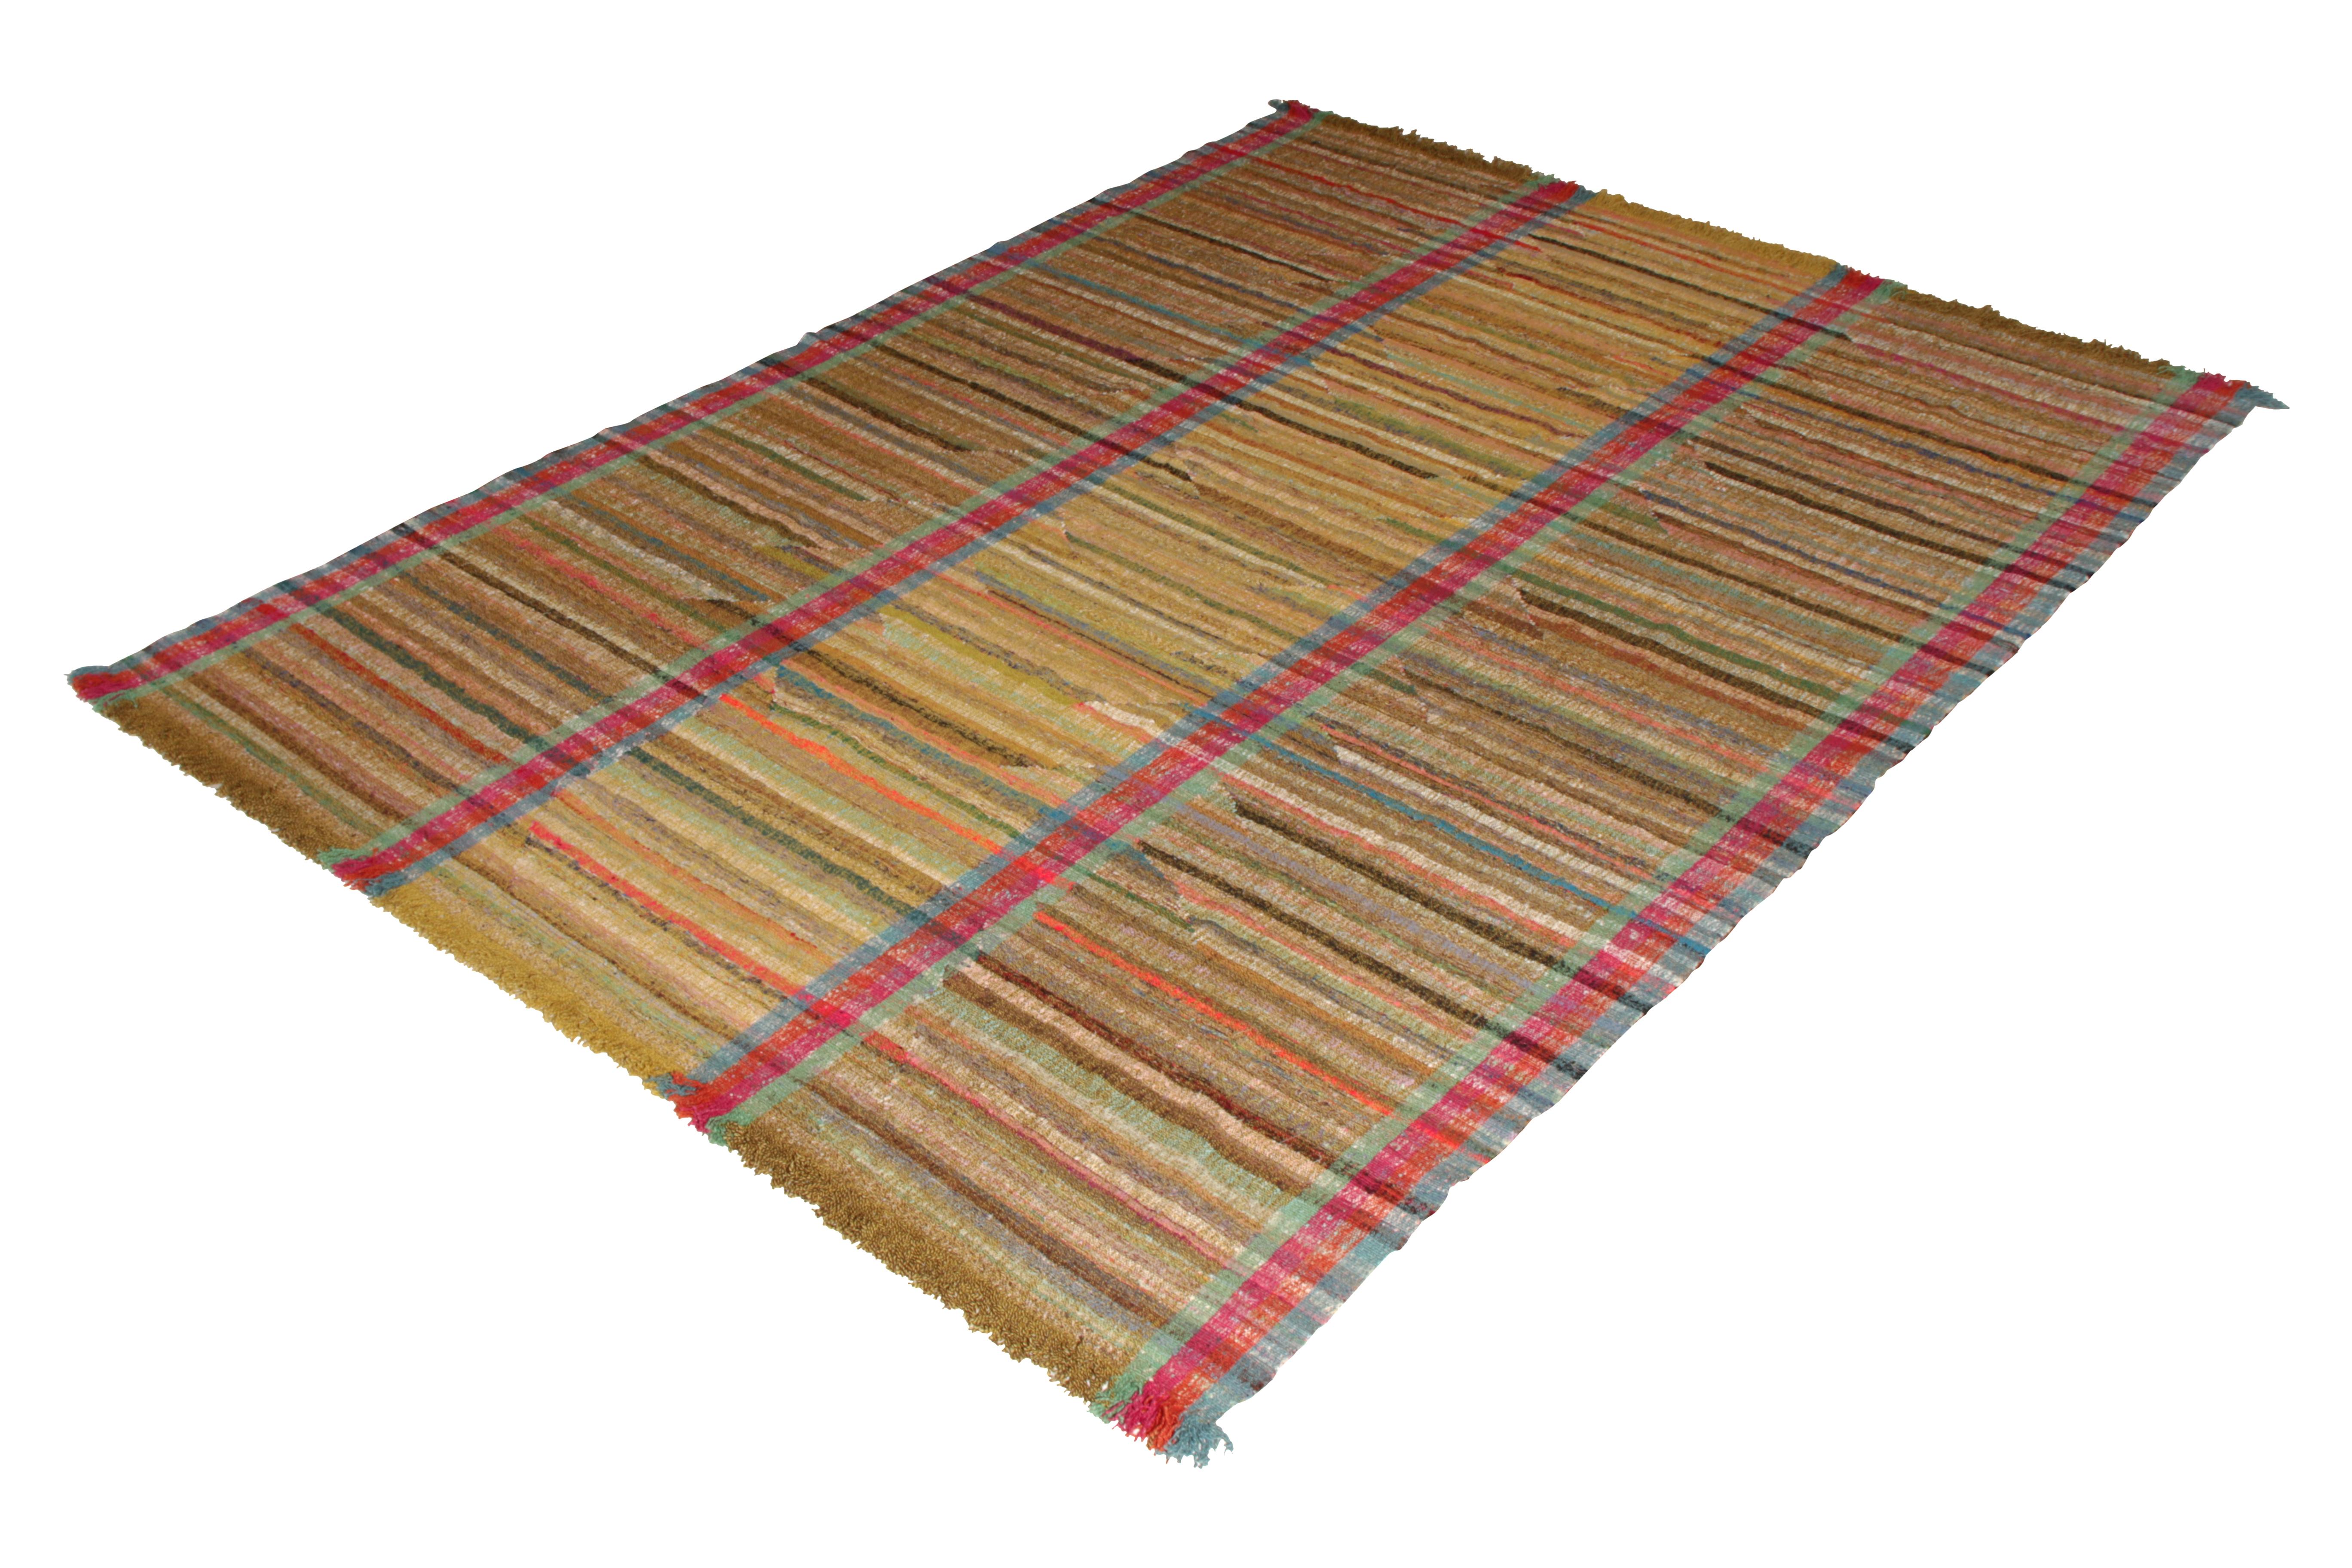 This modern Kilim represents a selection of distinct new patterns joining Rug & Kilim’s titular Kilim and flat-weave collection, with this piece representing a subcollection uniquely handwoven from the yarns of classic textiles and Kilims to create